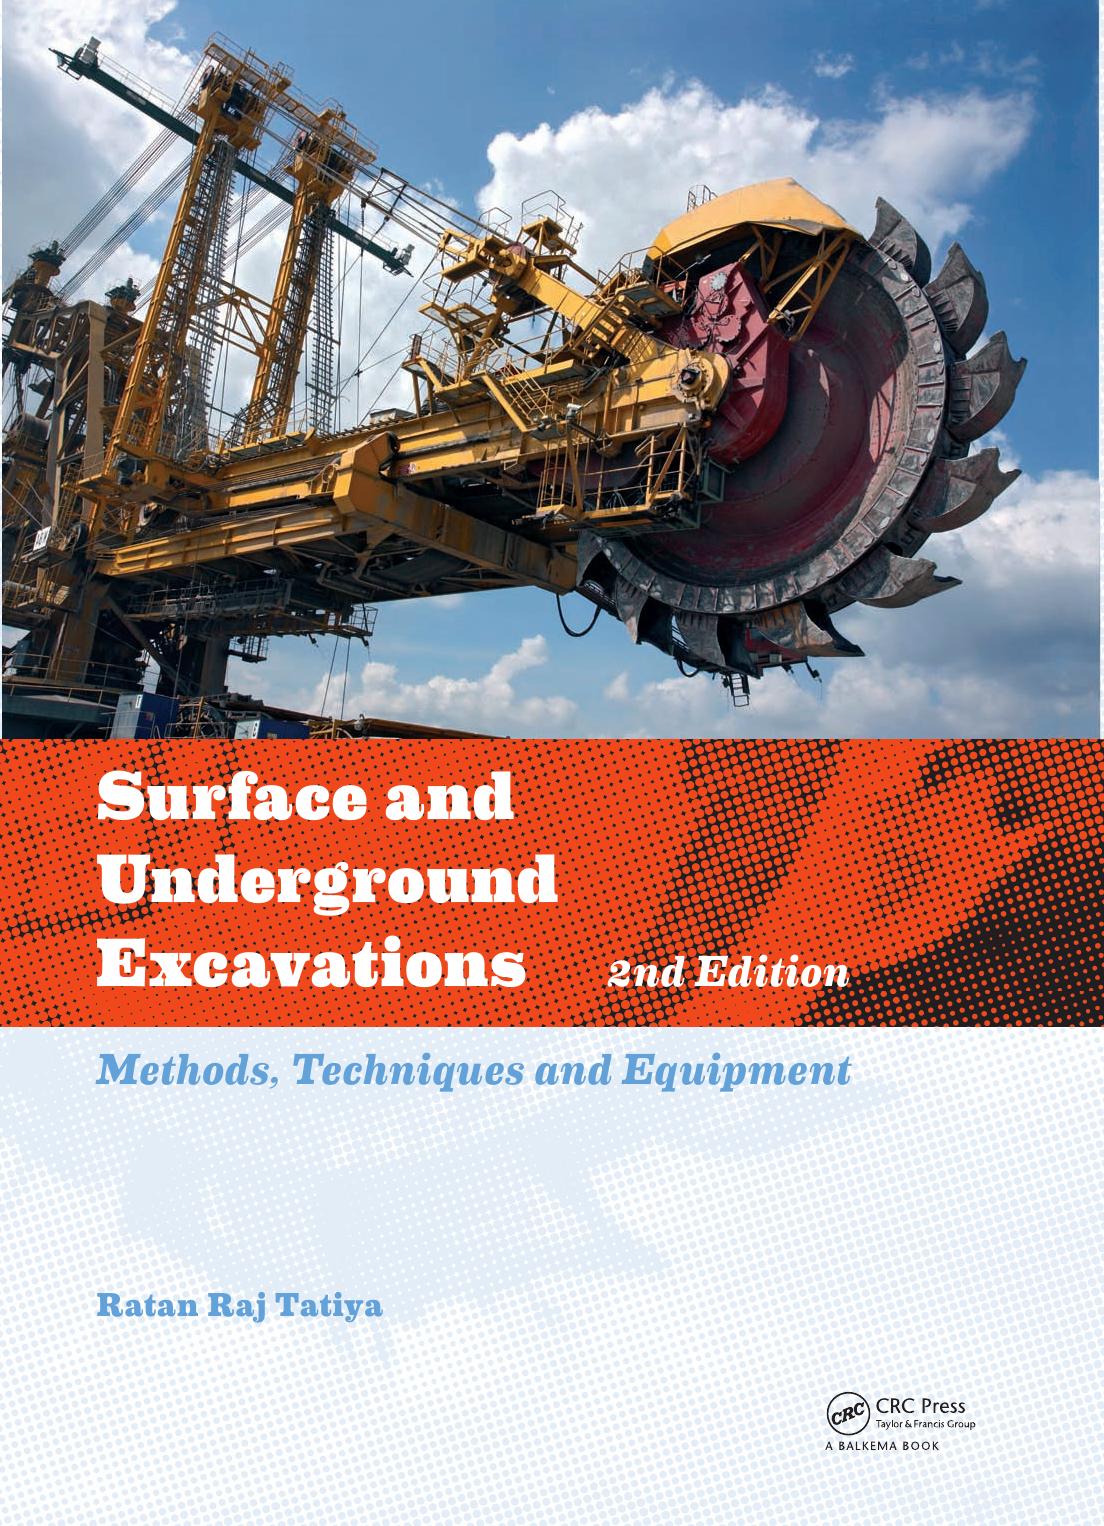 Surface and Underground Excavations 2nd Edition: Methods, Techniques and Equipment